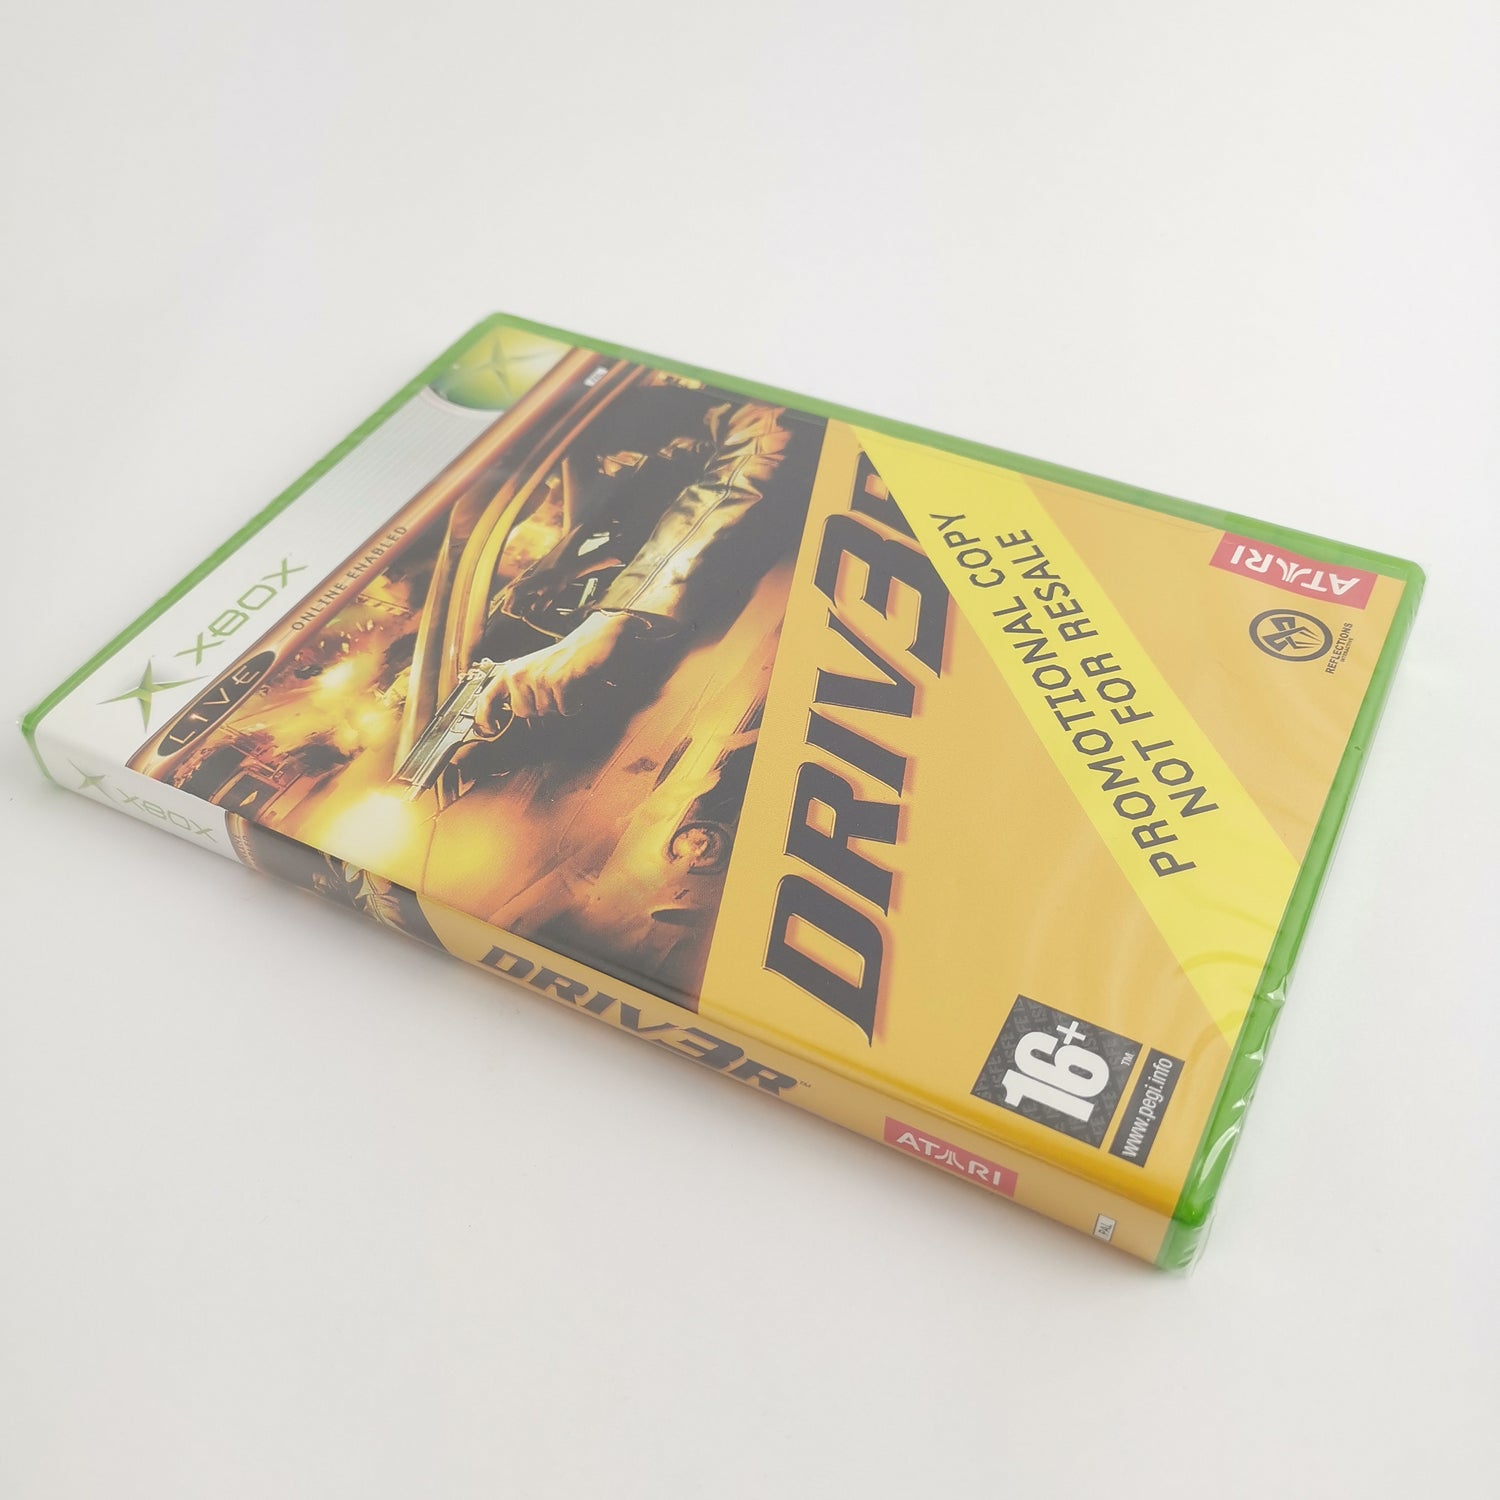 Microsoft Xbox Classic Promo : Driver 3 Promotional Copy | Promotional DVD NEW SEALED